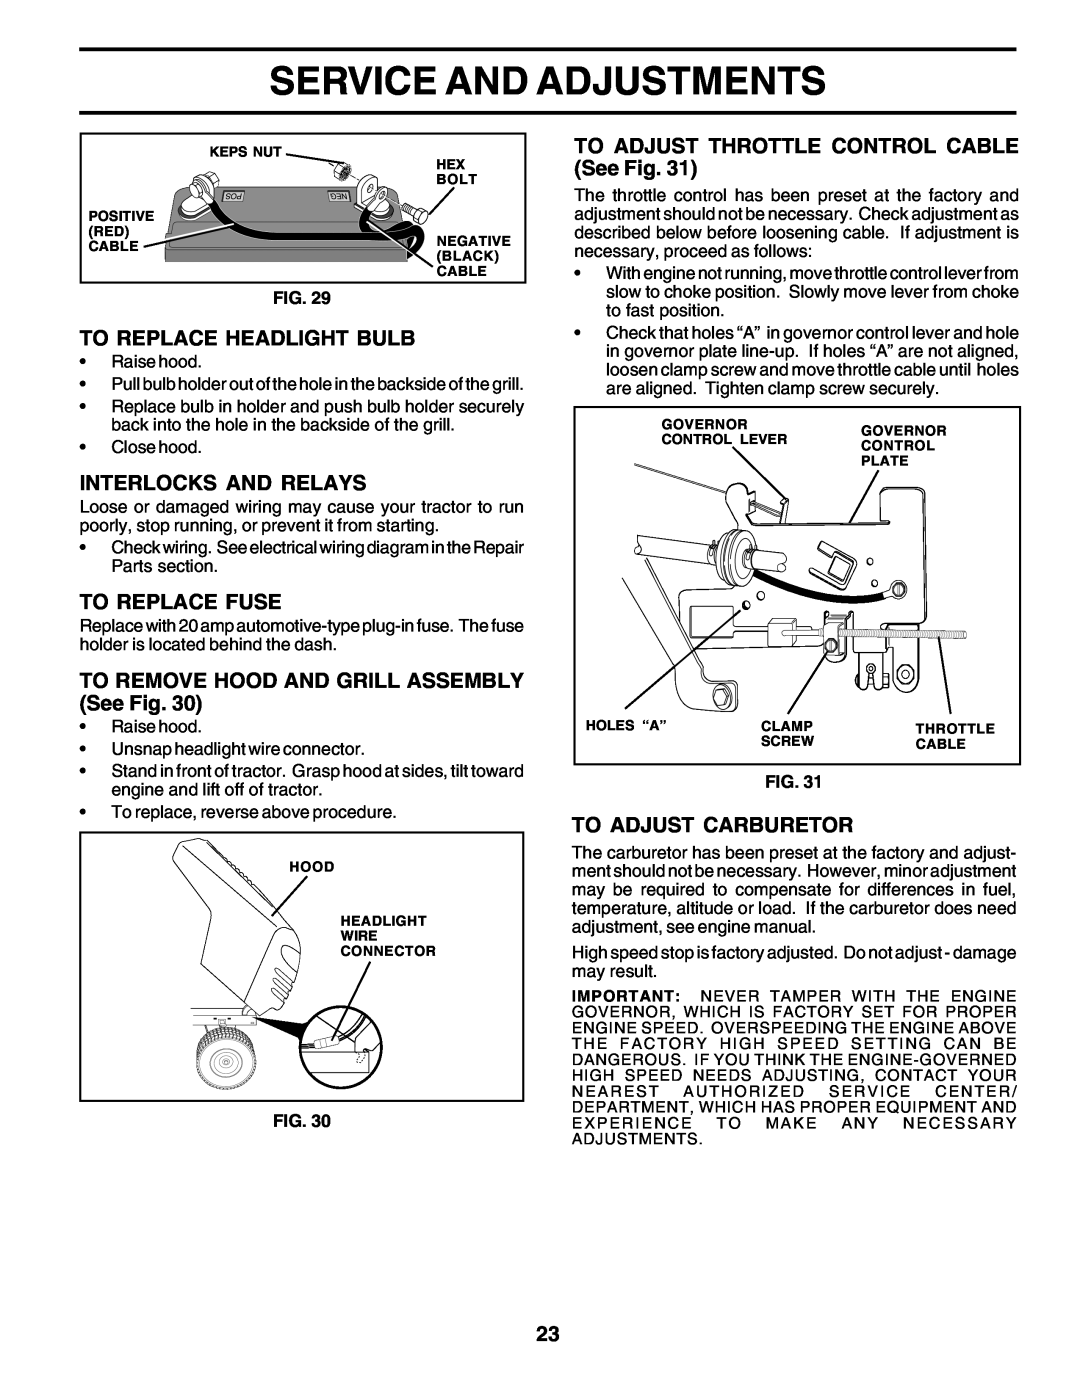 Poulan 178379 To Replace Headlight Bulb, Interlocks And Relays, To Replace Fuse, TO REMOVE HOOD AND GRILL ASSEMBLY See Fig 